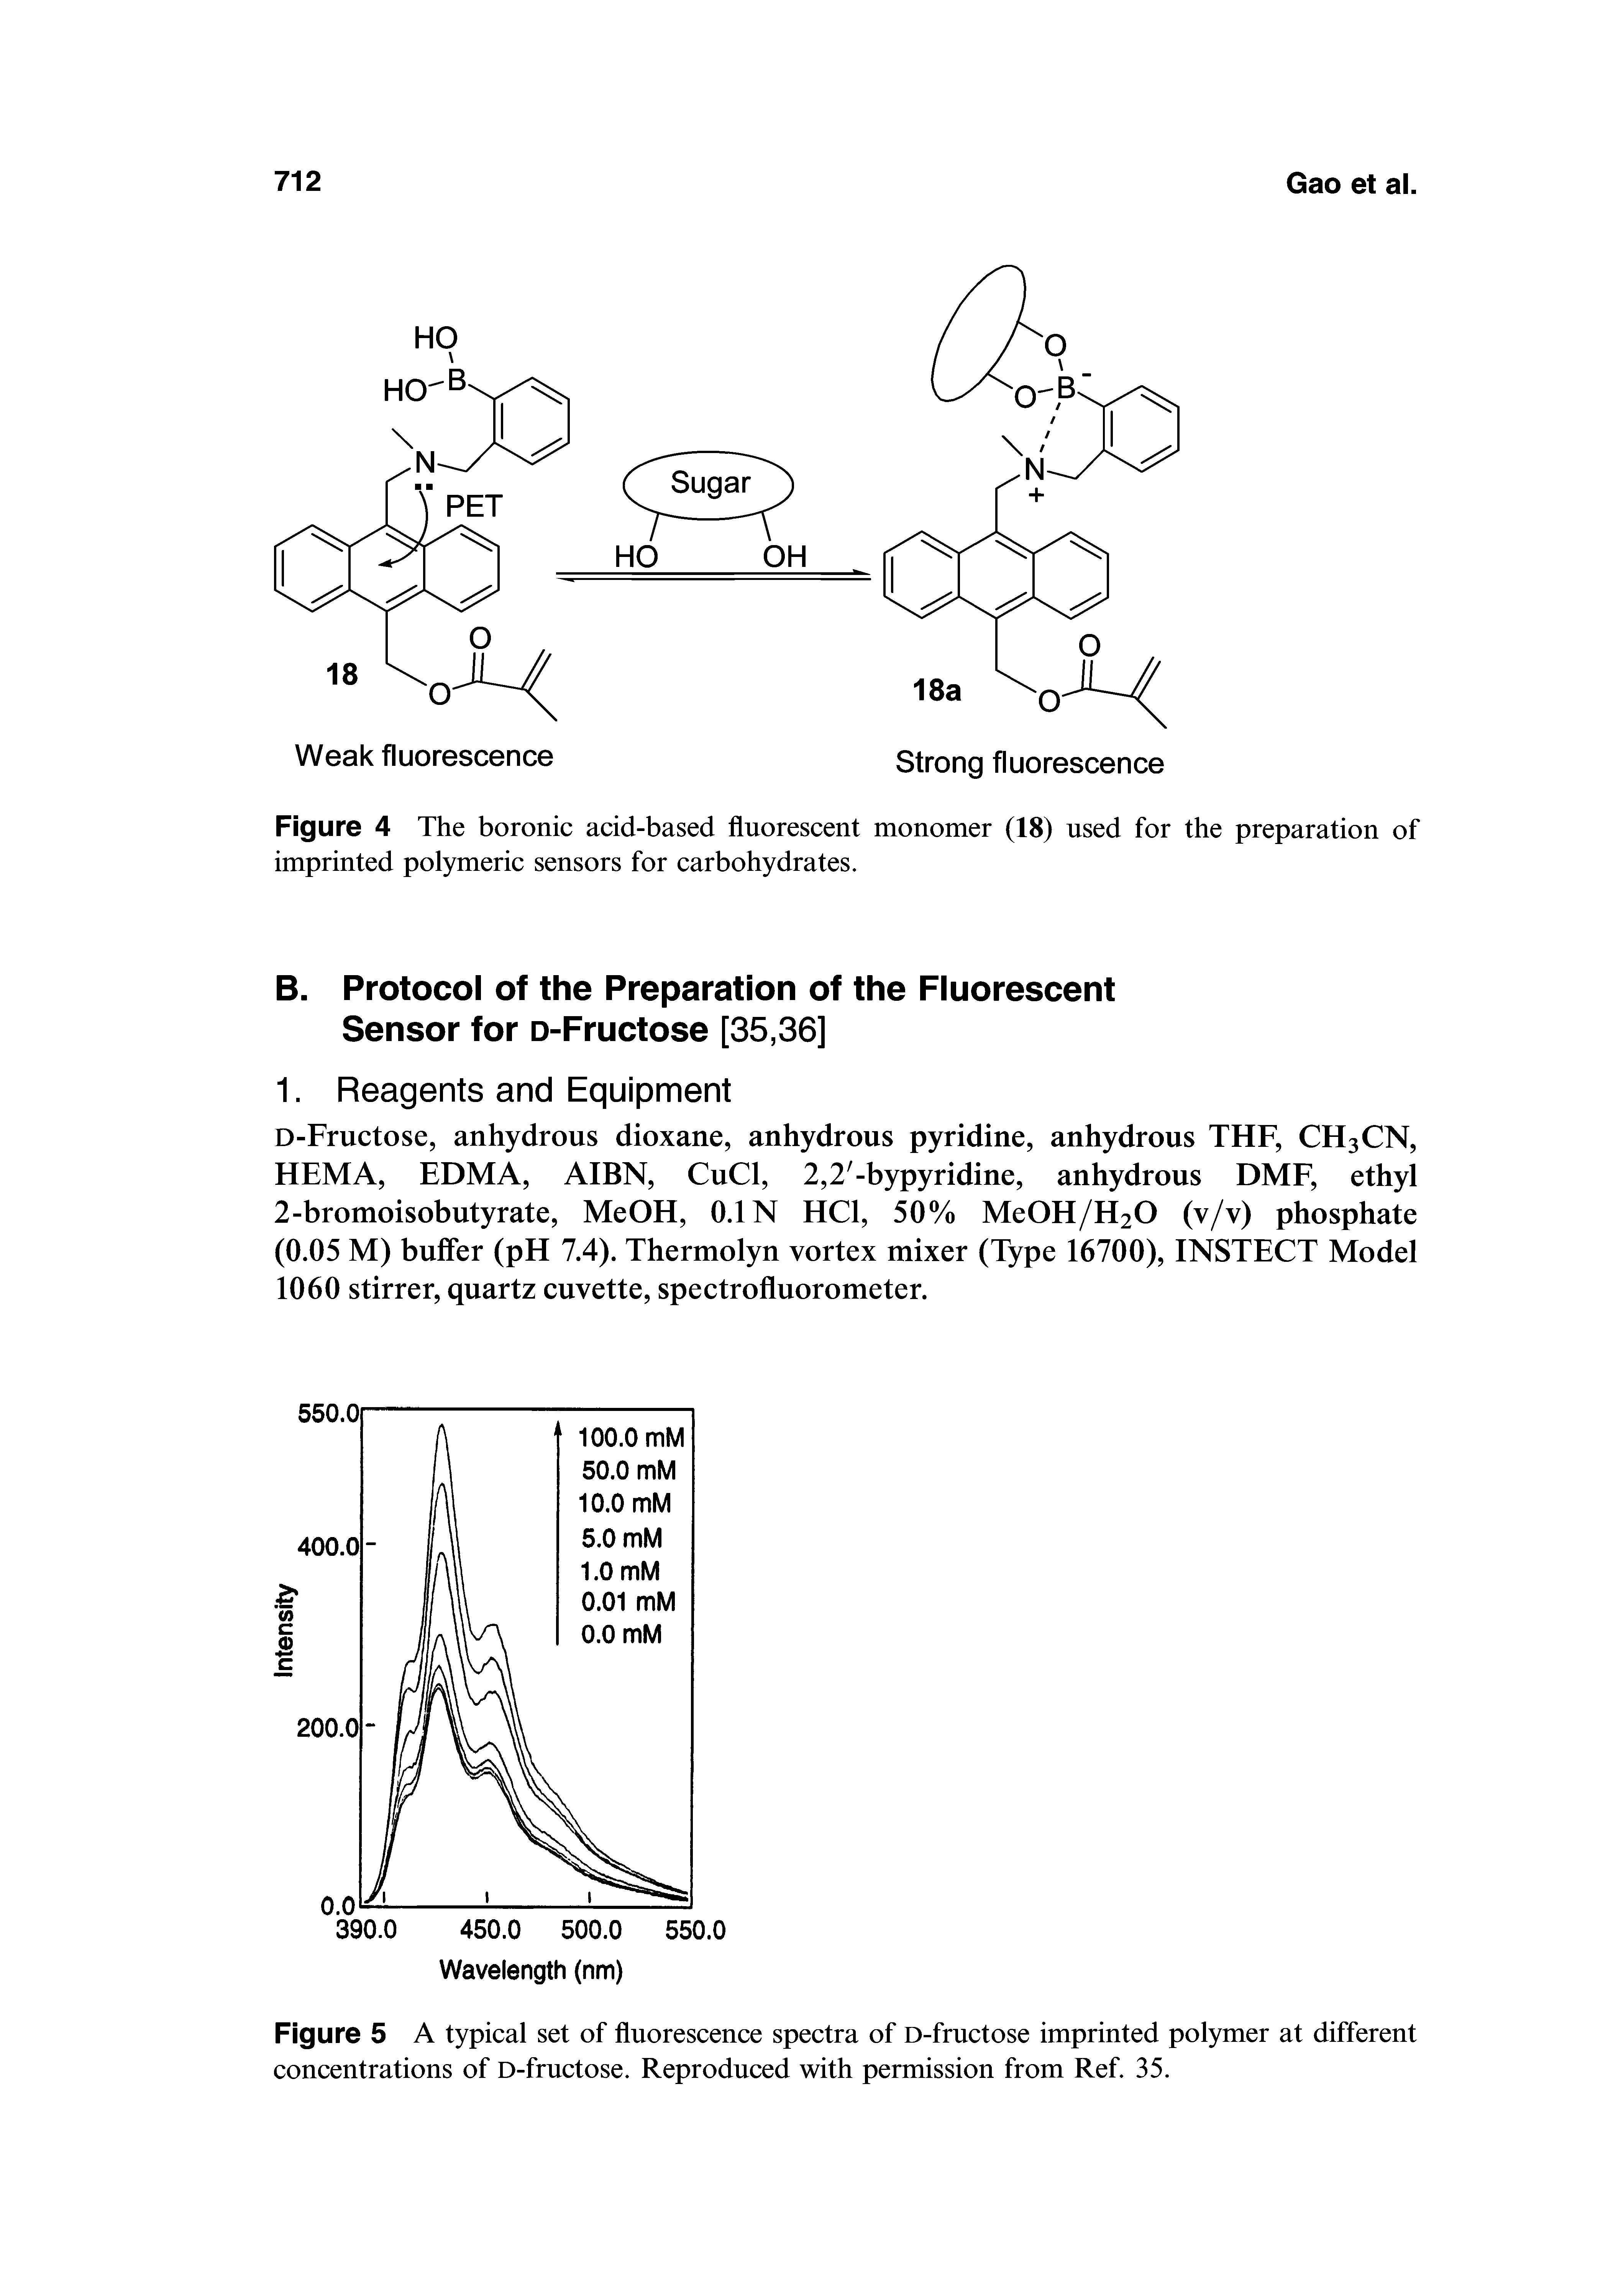 Figure 4 The boronic acid-based fluorescent monomer (18) used for the preparation of imprinted polymeric sensors for carbohydrates.